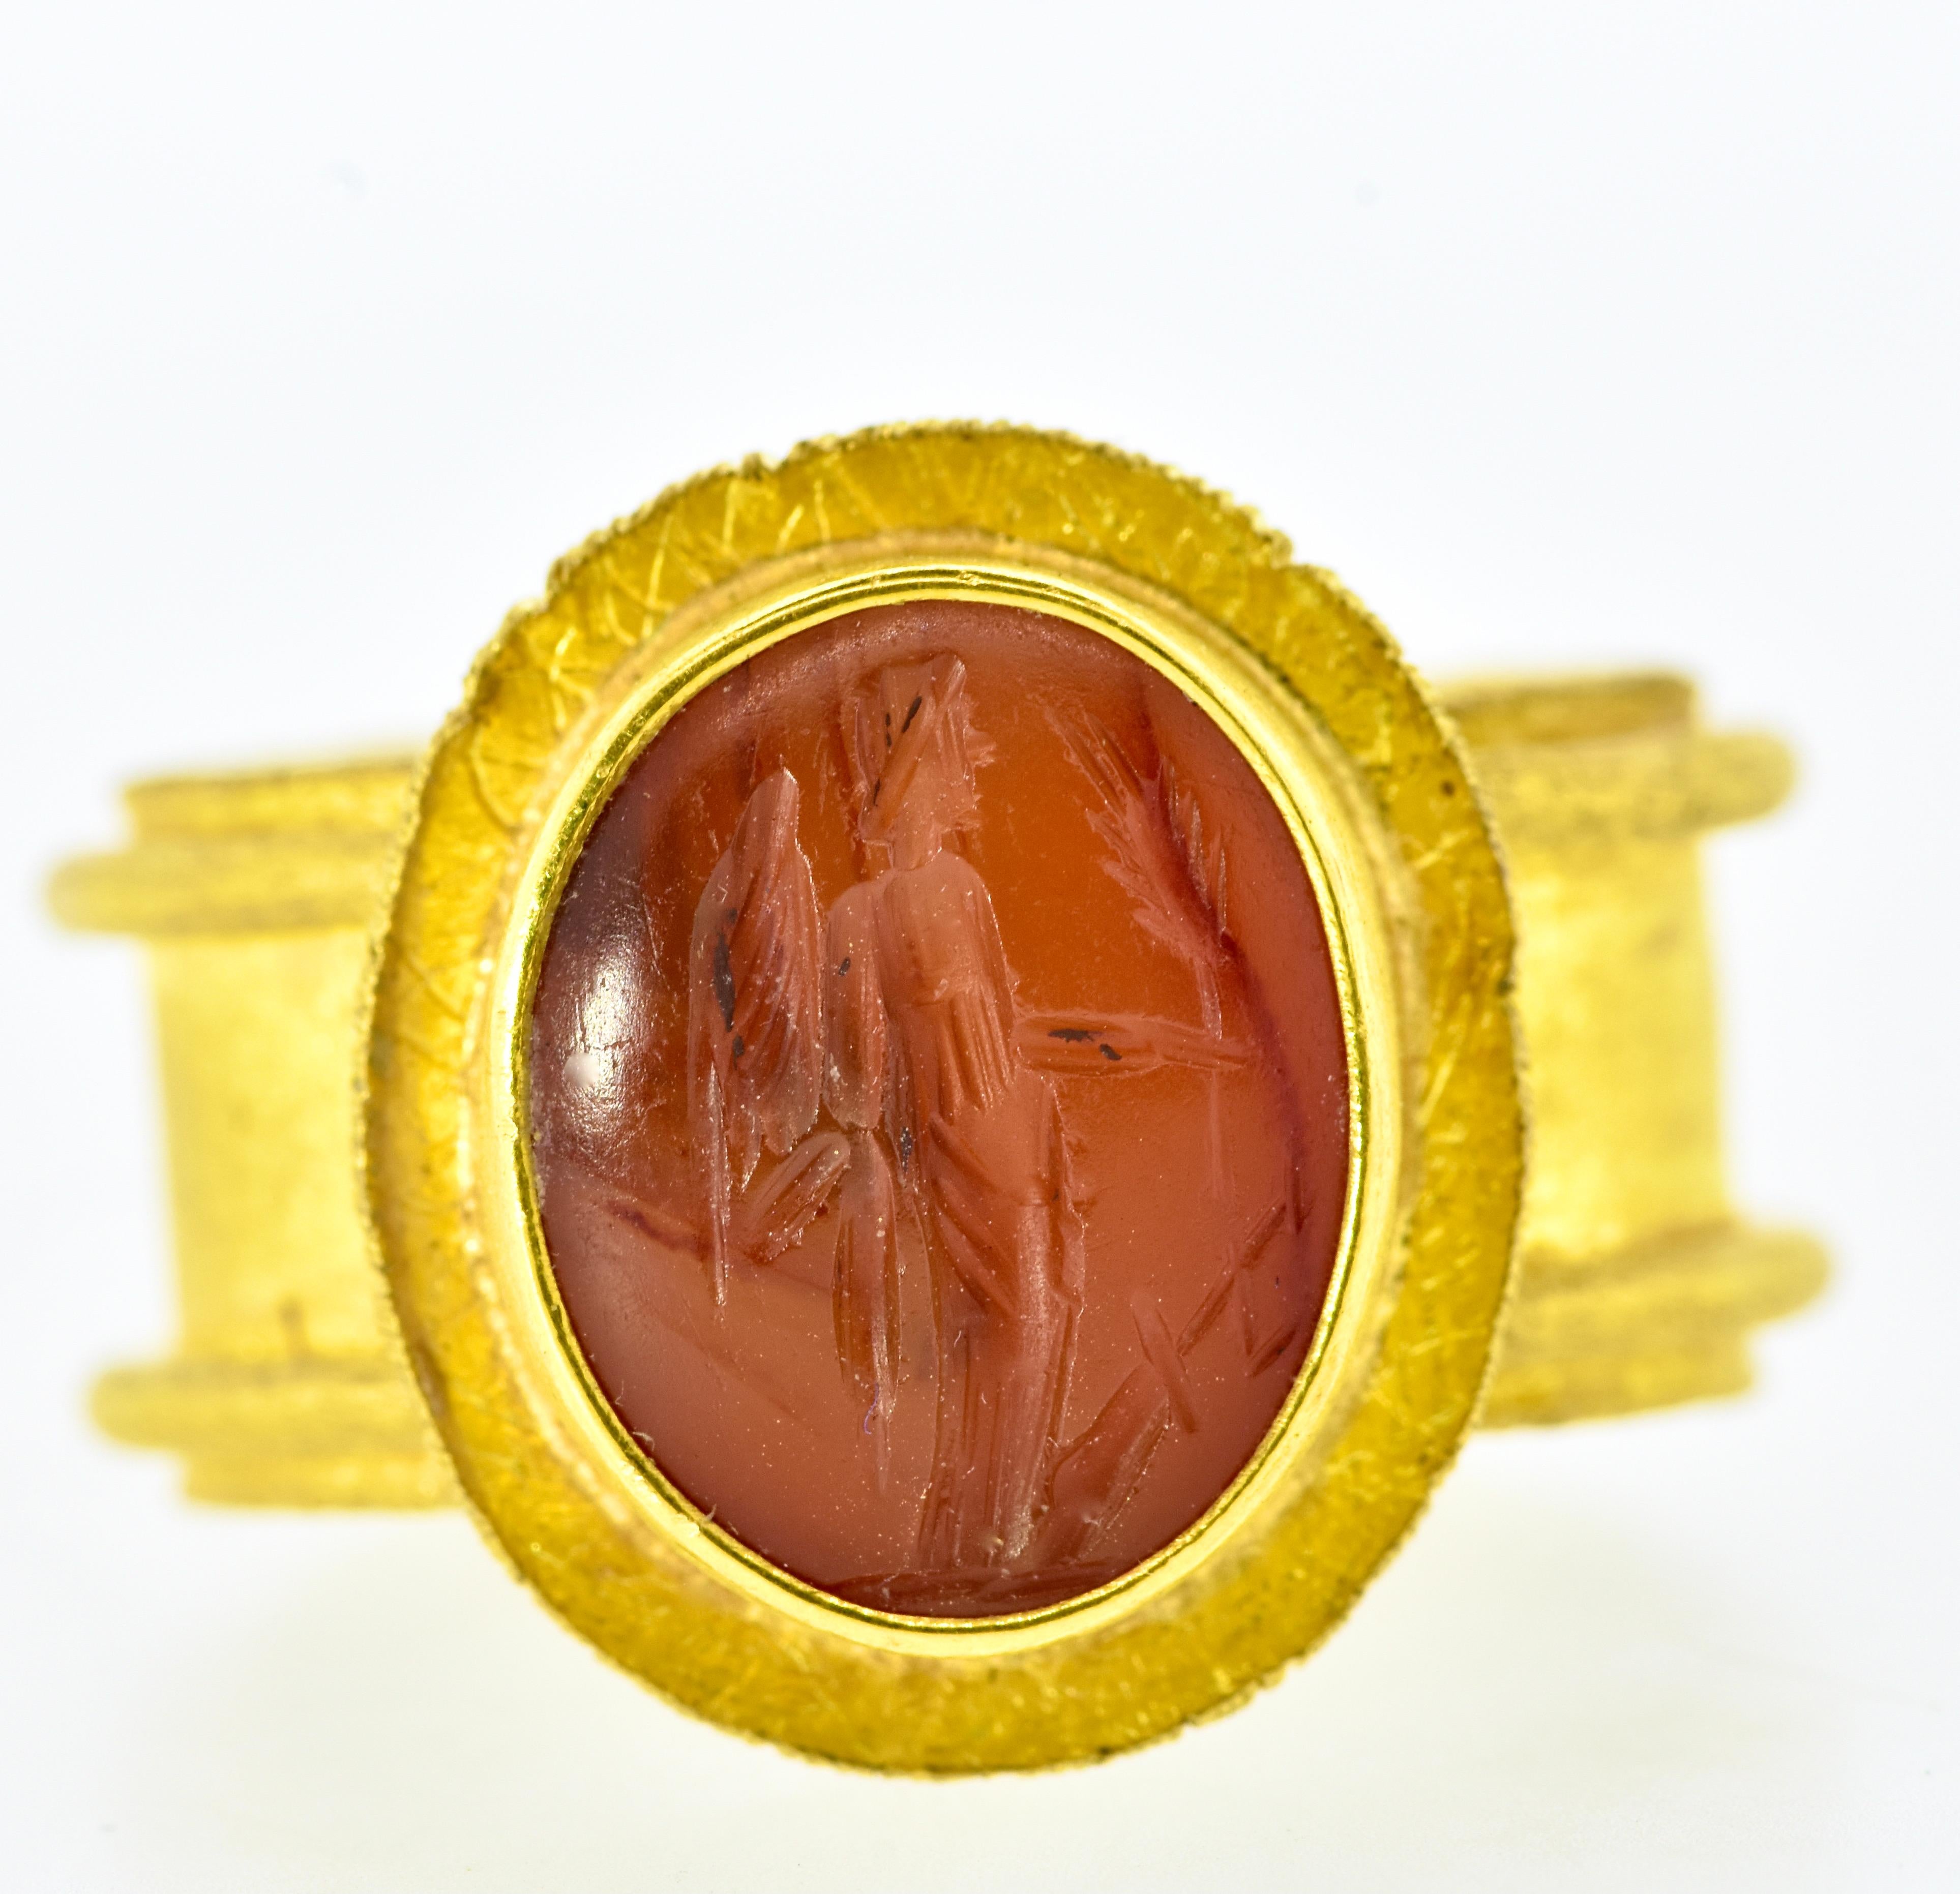 22K yellow gold ring centering an antique carnelian intaglio of a standing angel extending an olive branch - signifying peace. The intaglio measures 14.4 mm by 11.5 mm. The wide band measures 10.1 mm.  This ring is signed by the jewelry designer